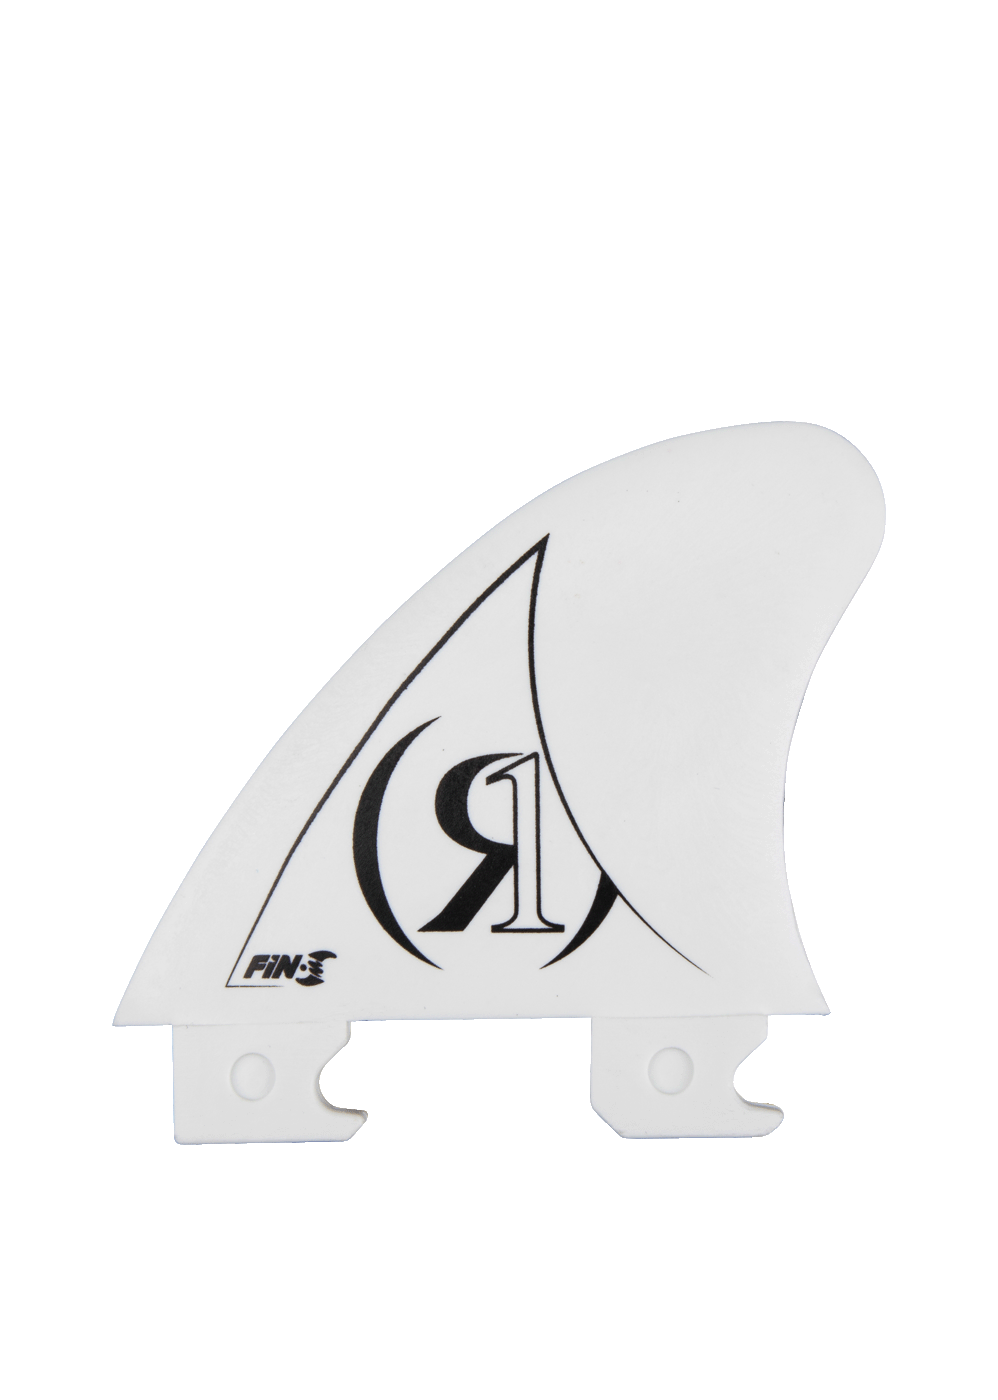 FLOATING-FIN-S-WHITE-3 copy